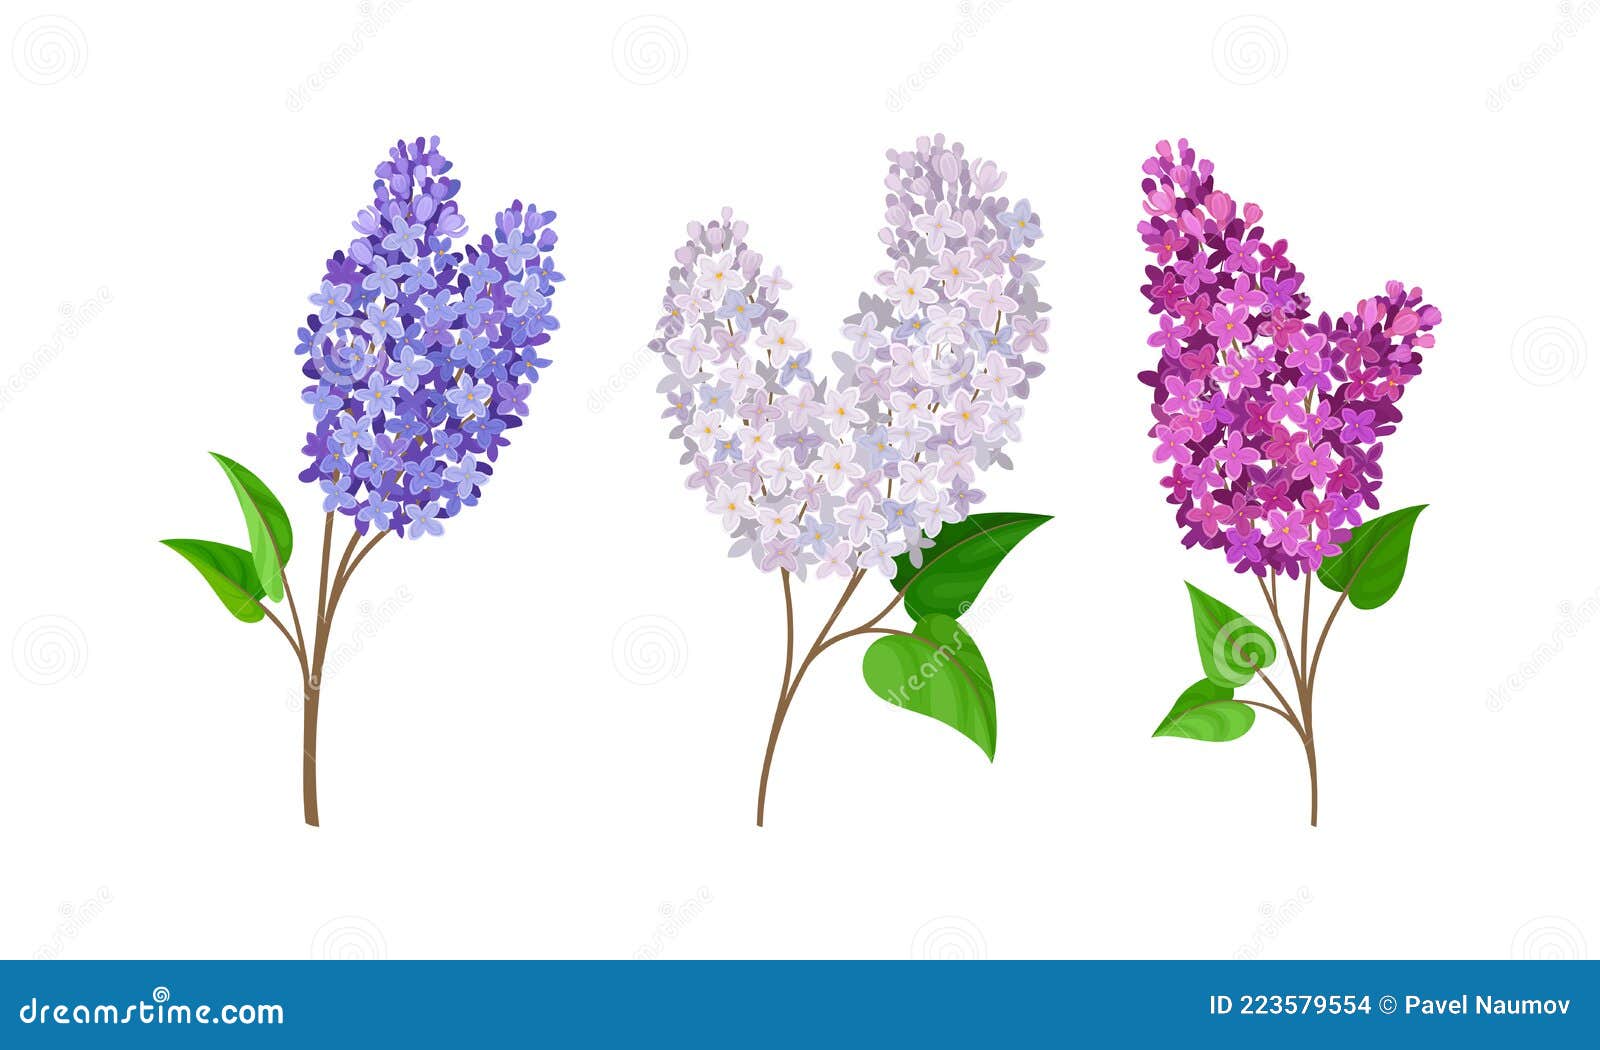 Lilac or Syringa Flowers with Showy Aromatic Blossom on Stem Vector Set ...